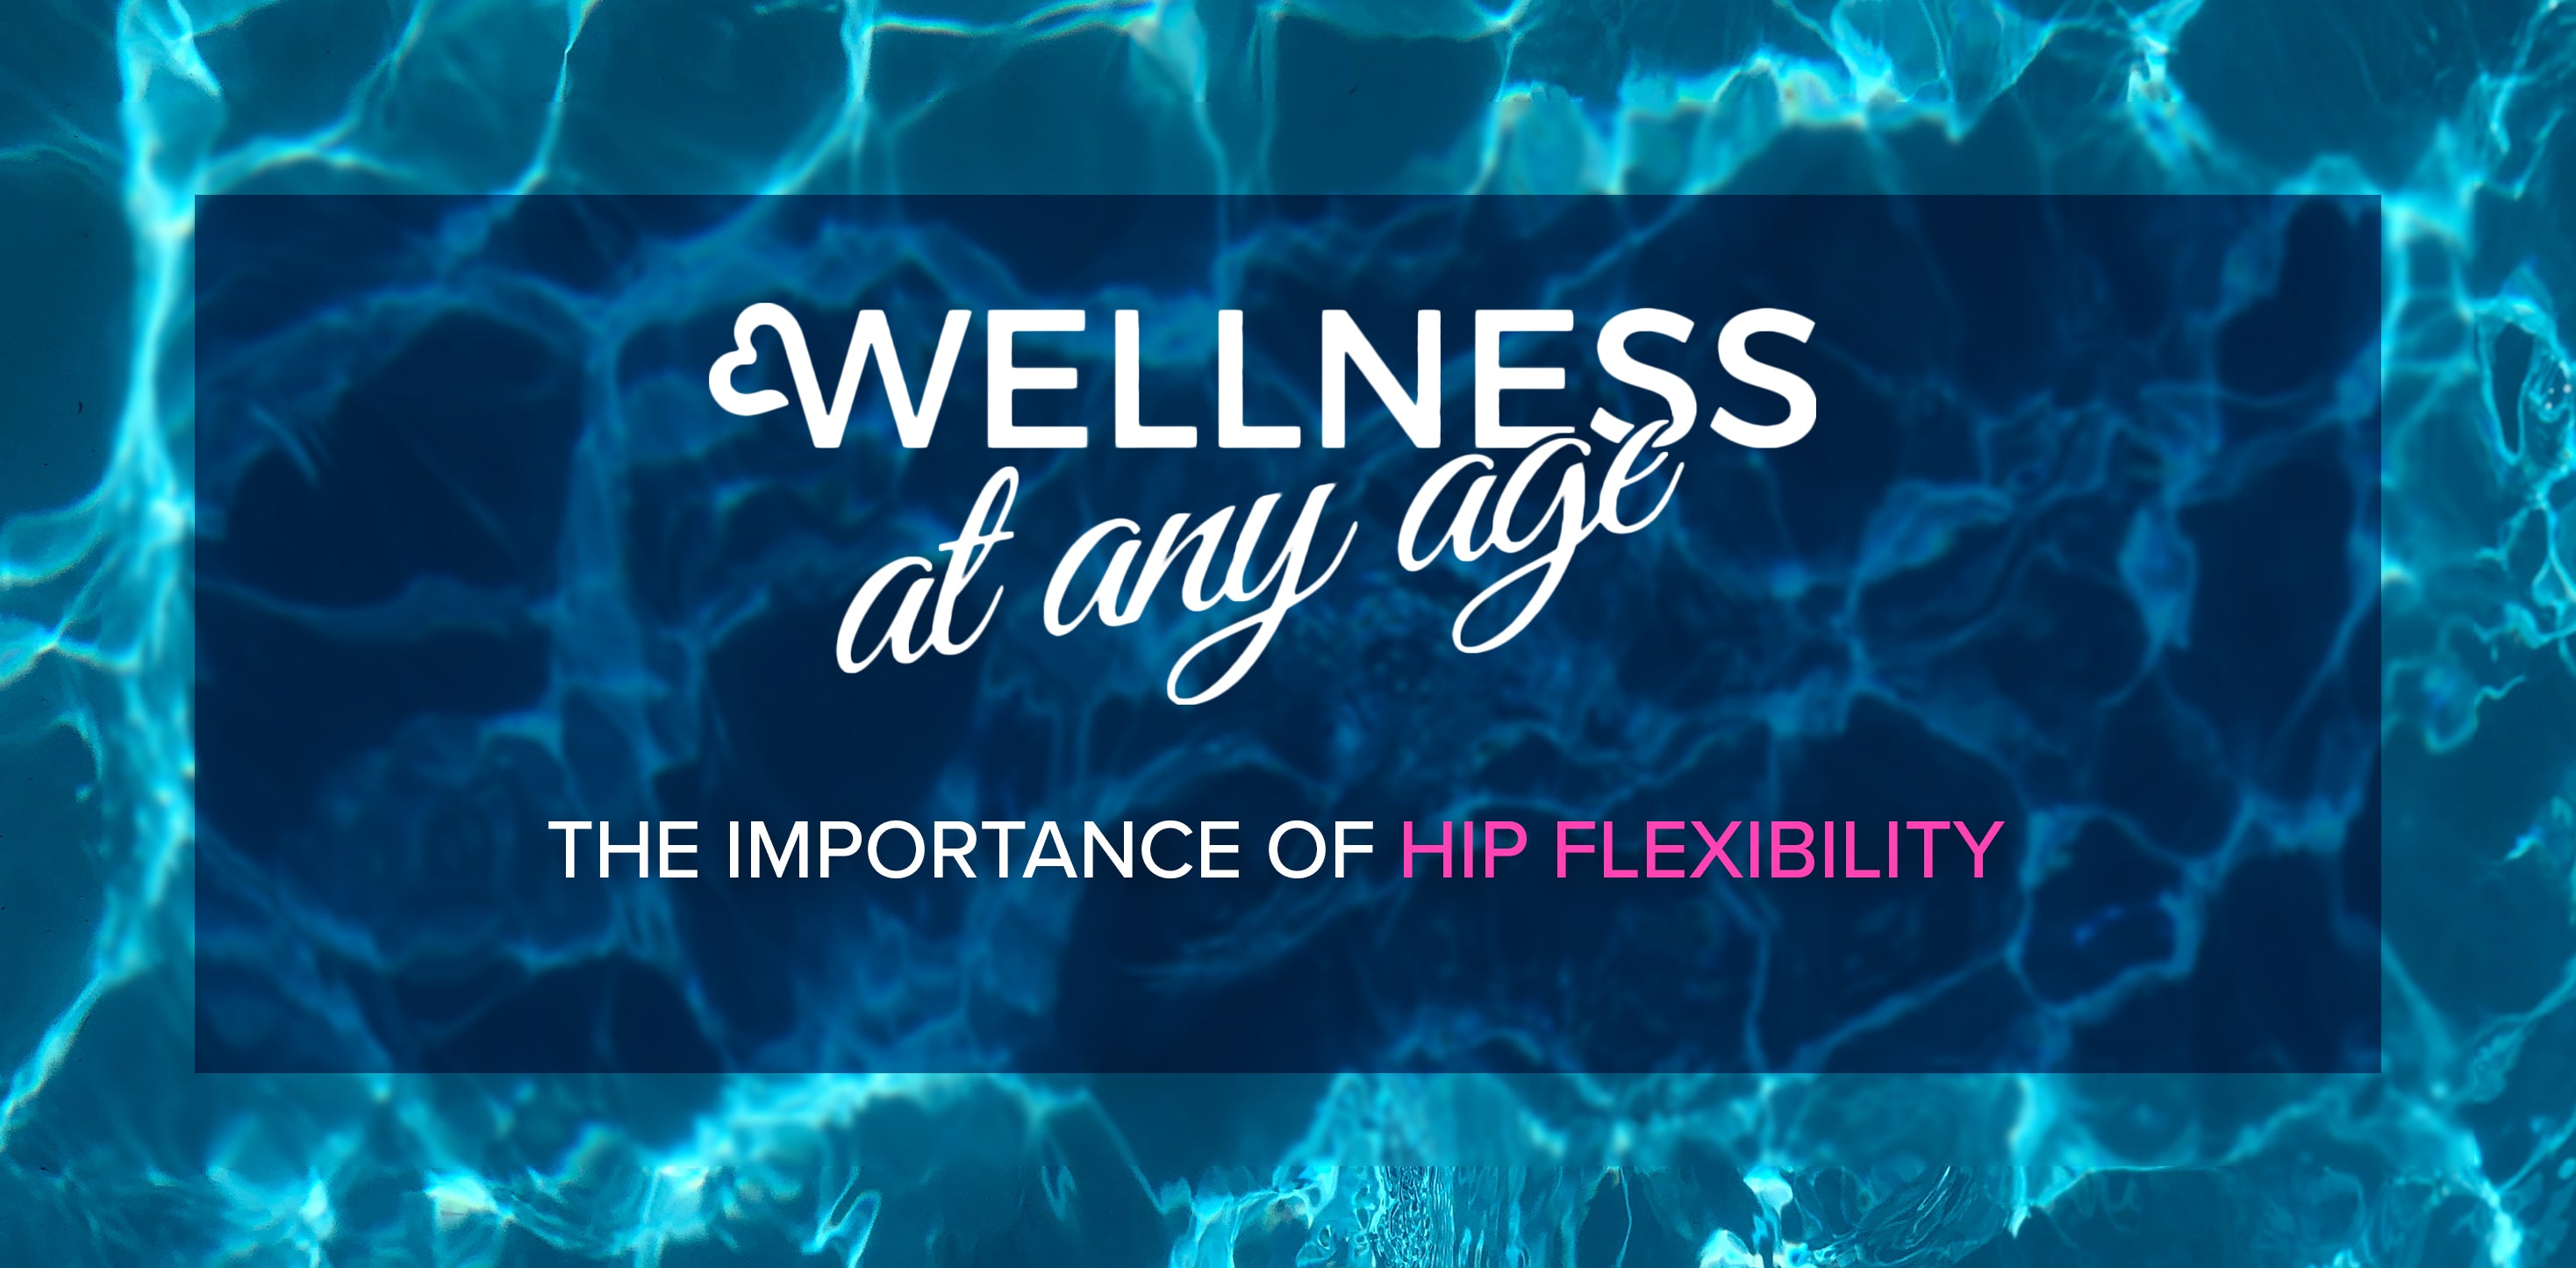 The Importance of Hip Flexibility